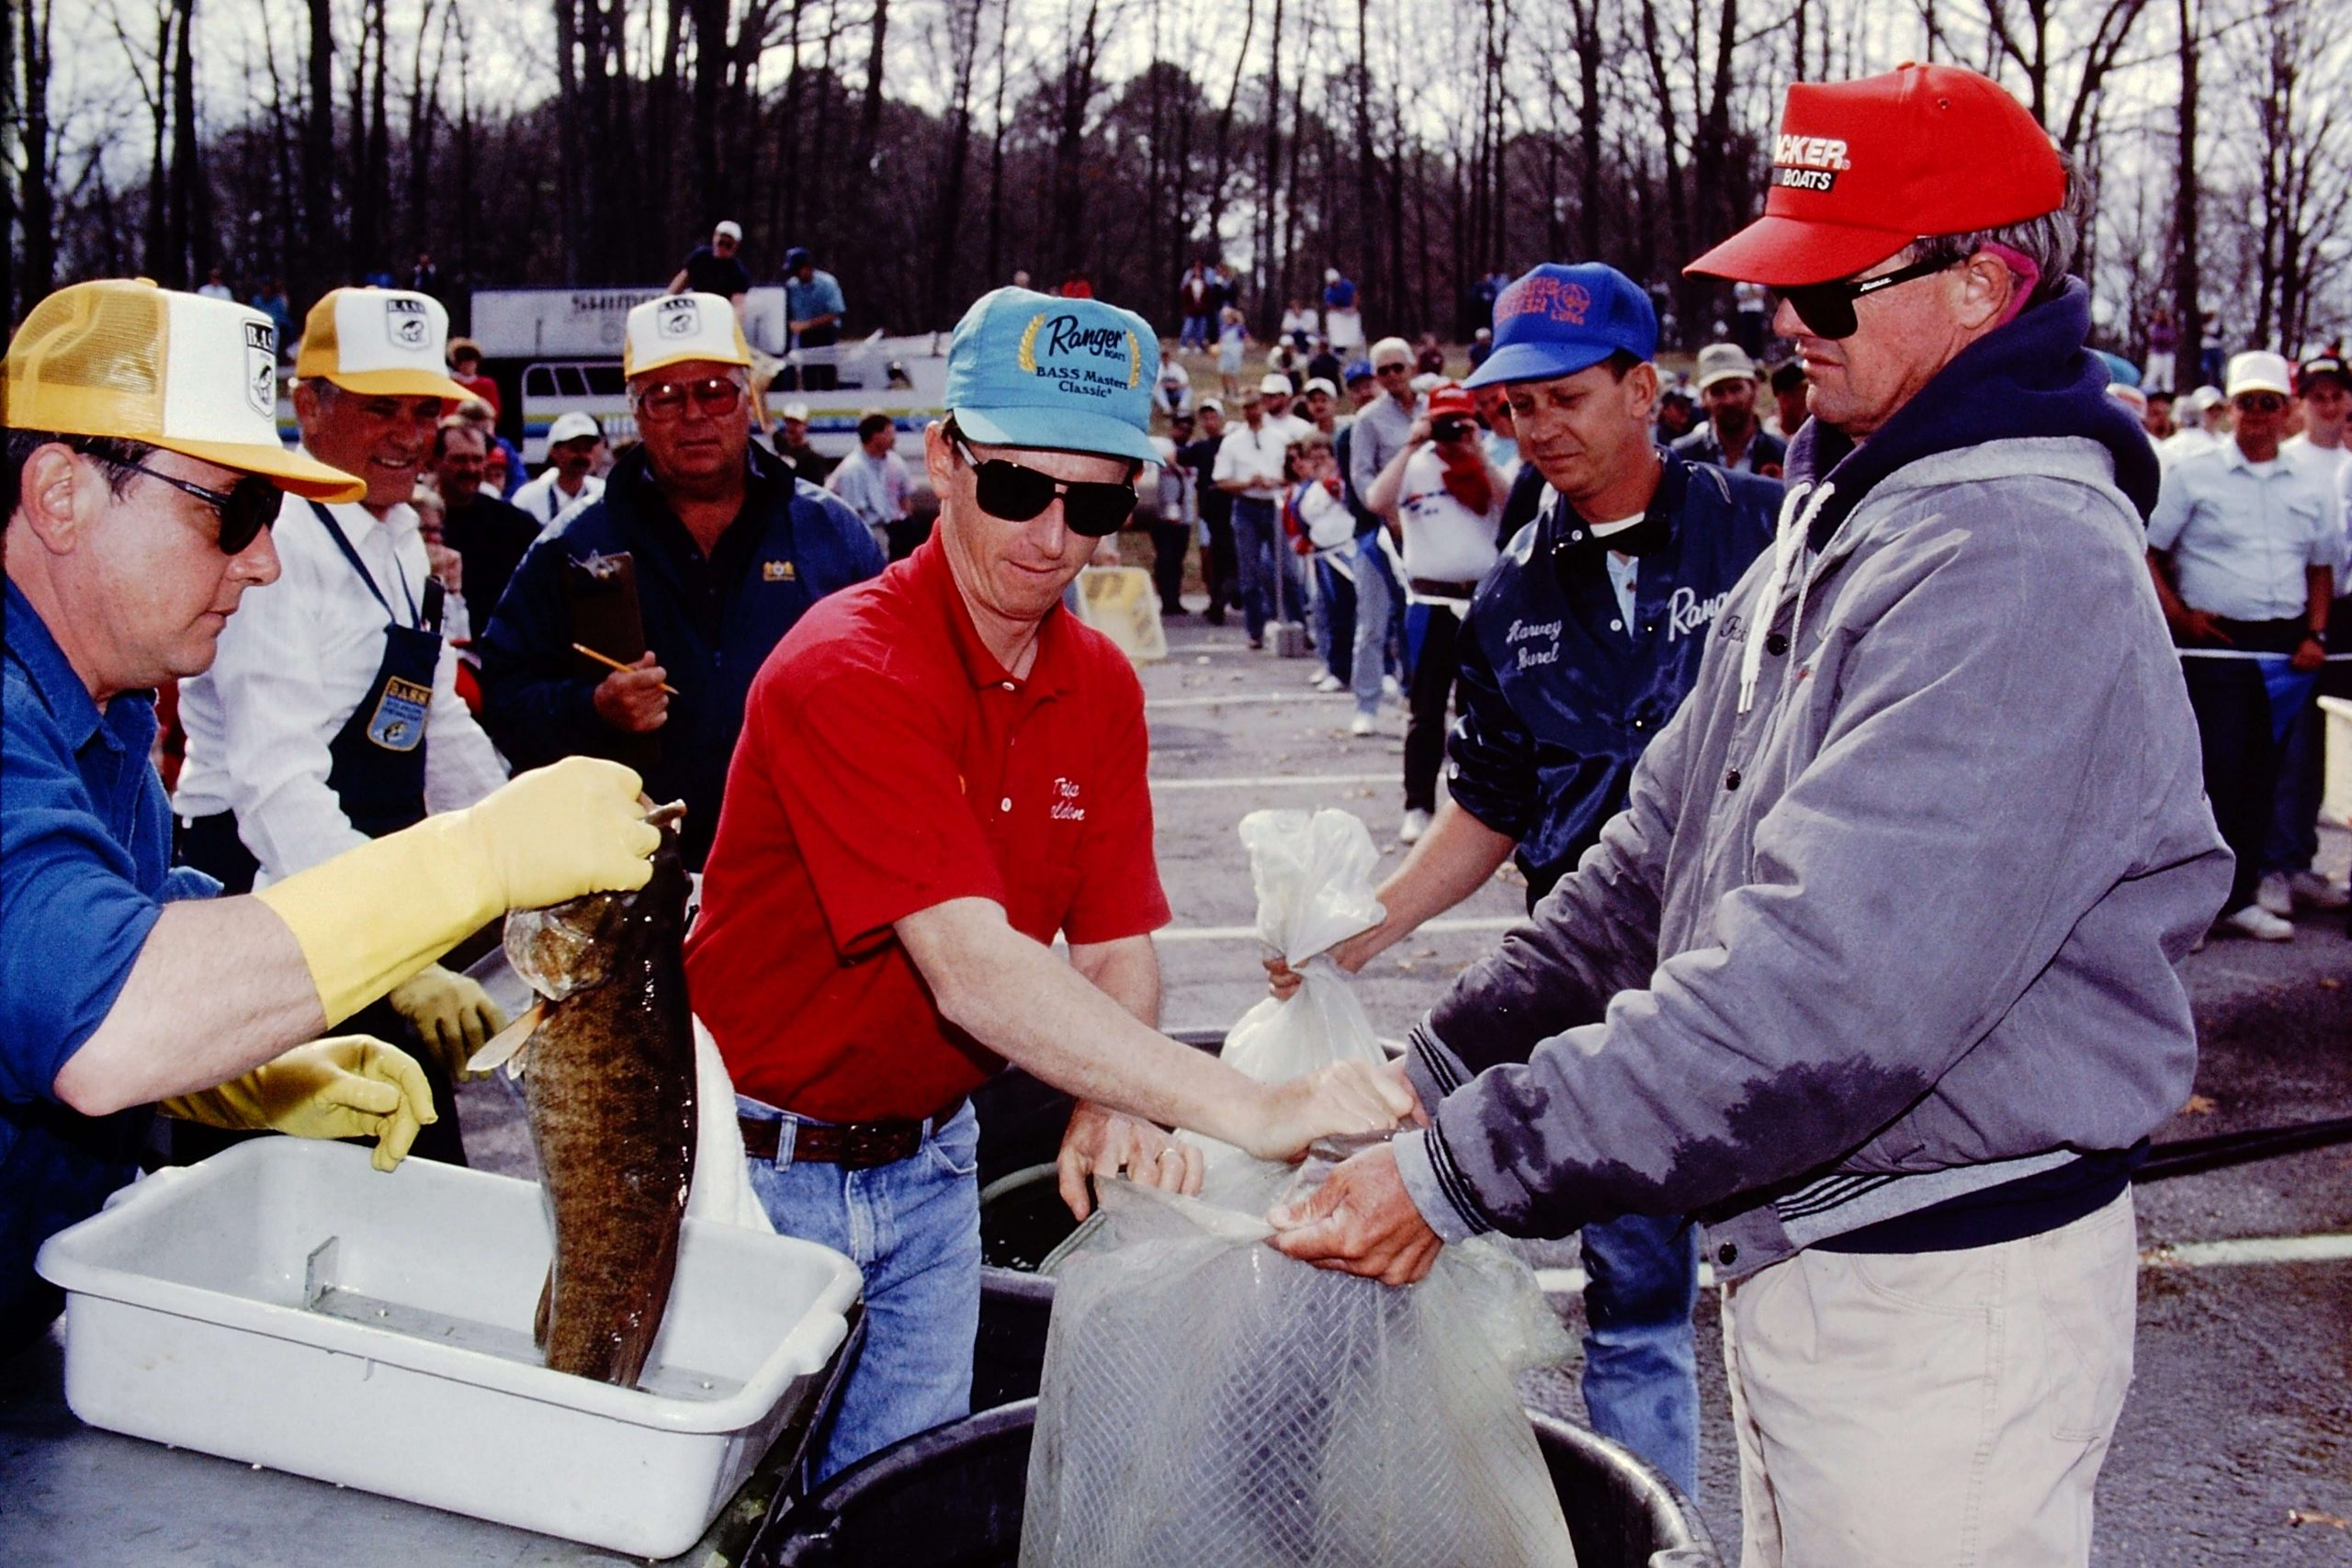 Current Tournament Director Trip Weldon assisted Clunn with his Day 1 catch. âThat first day was one of the best fishing days I ever had,â Clunn said at the time. âI couldnât do anything wrong. I could catch a fish and the wind would blow me 50 yards. Then I would cast and catch another 5-pounder.â